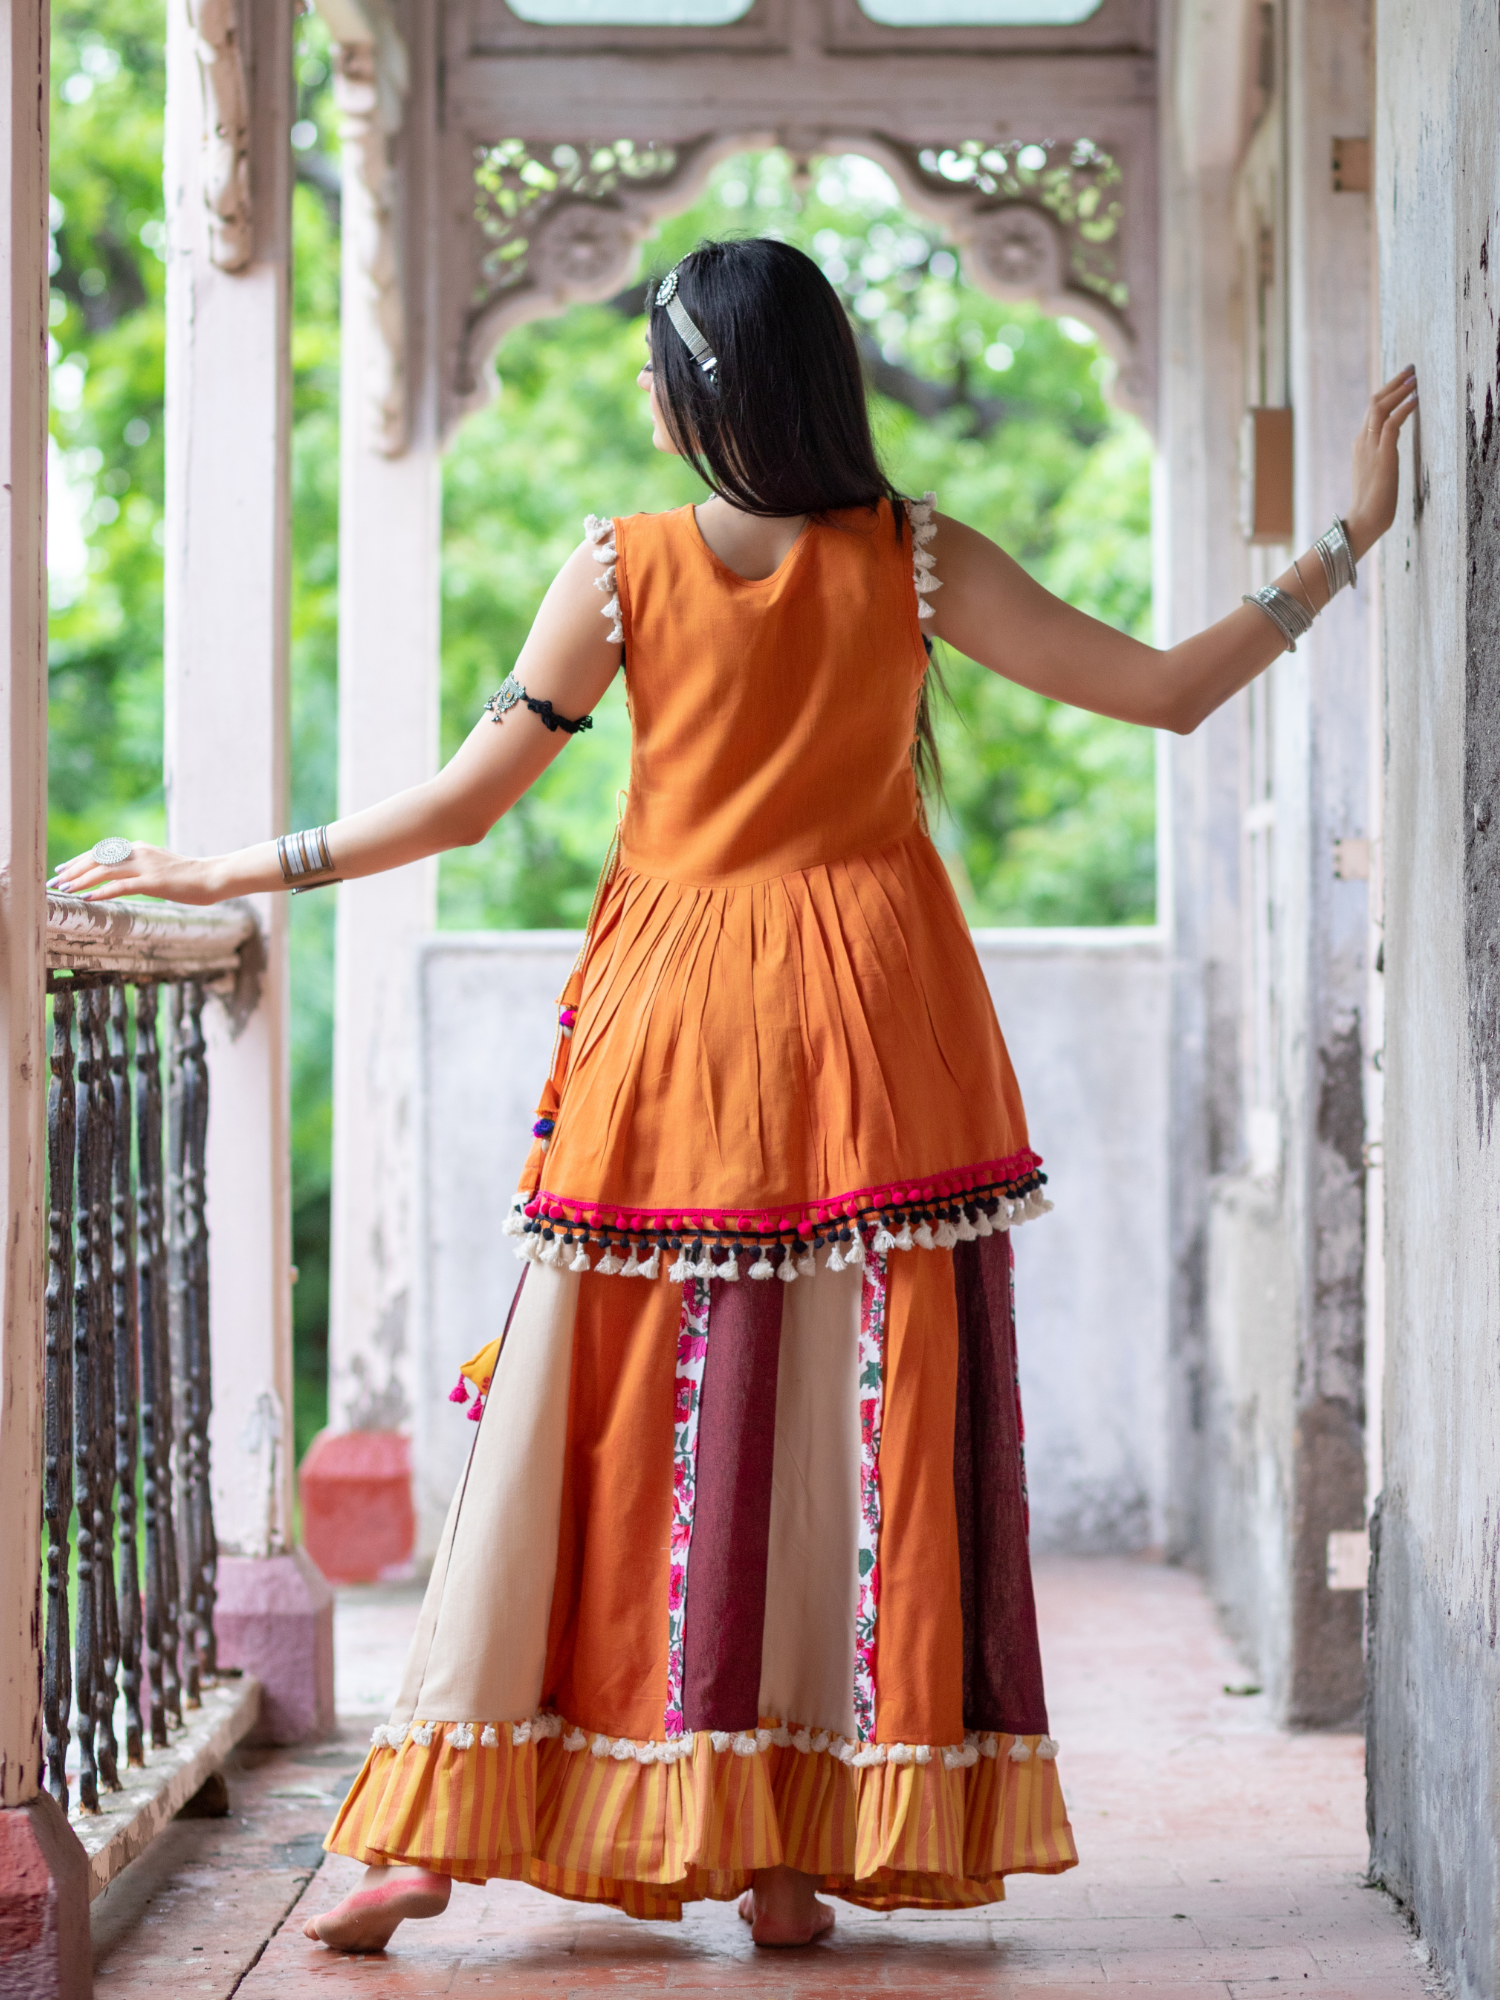 Eye catchy orange embroidered peplum style top with colorful flairy skirt